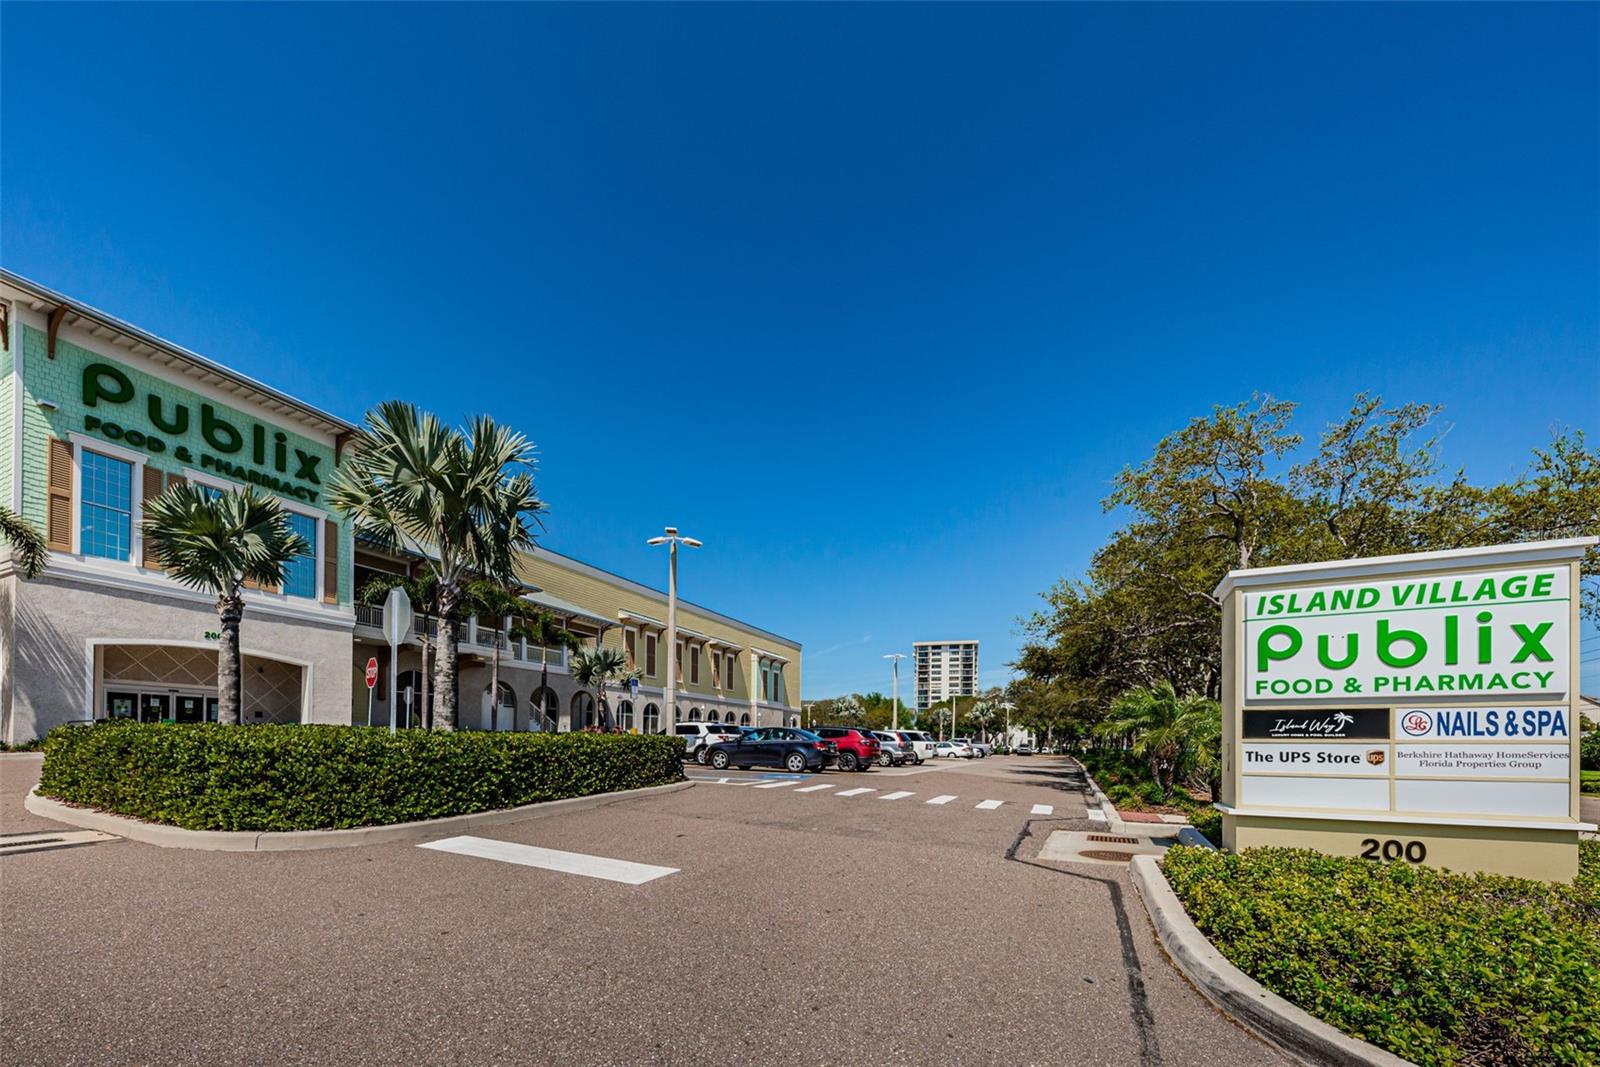 Just a stone's throw away, Publix is your convenient go-to for groceries, fresh produce, and everyday essentials.